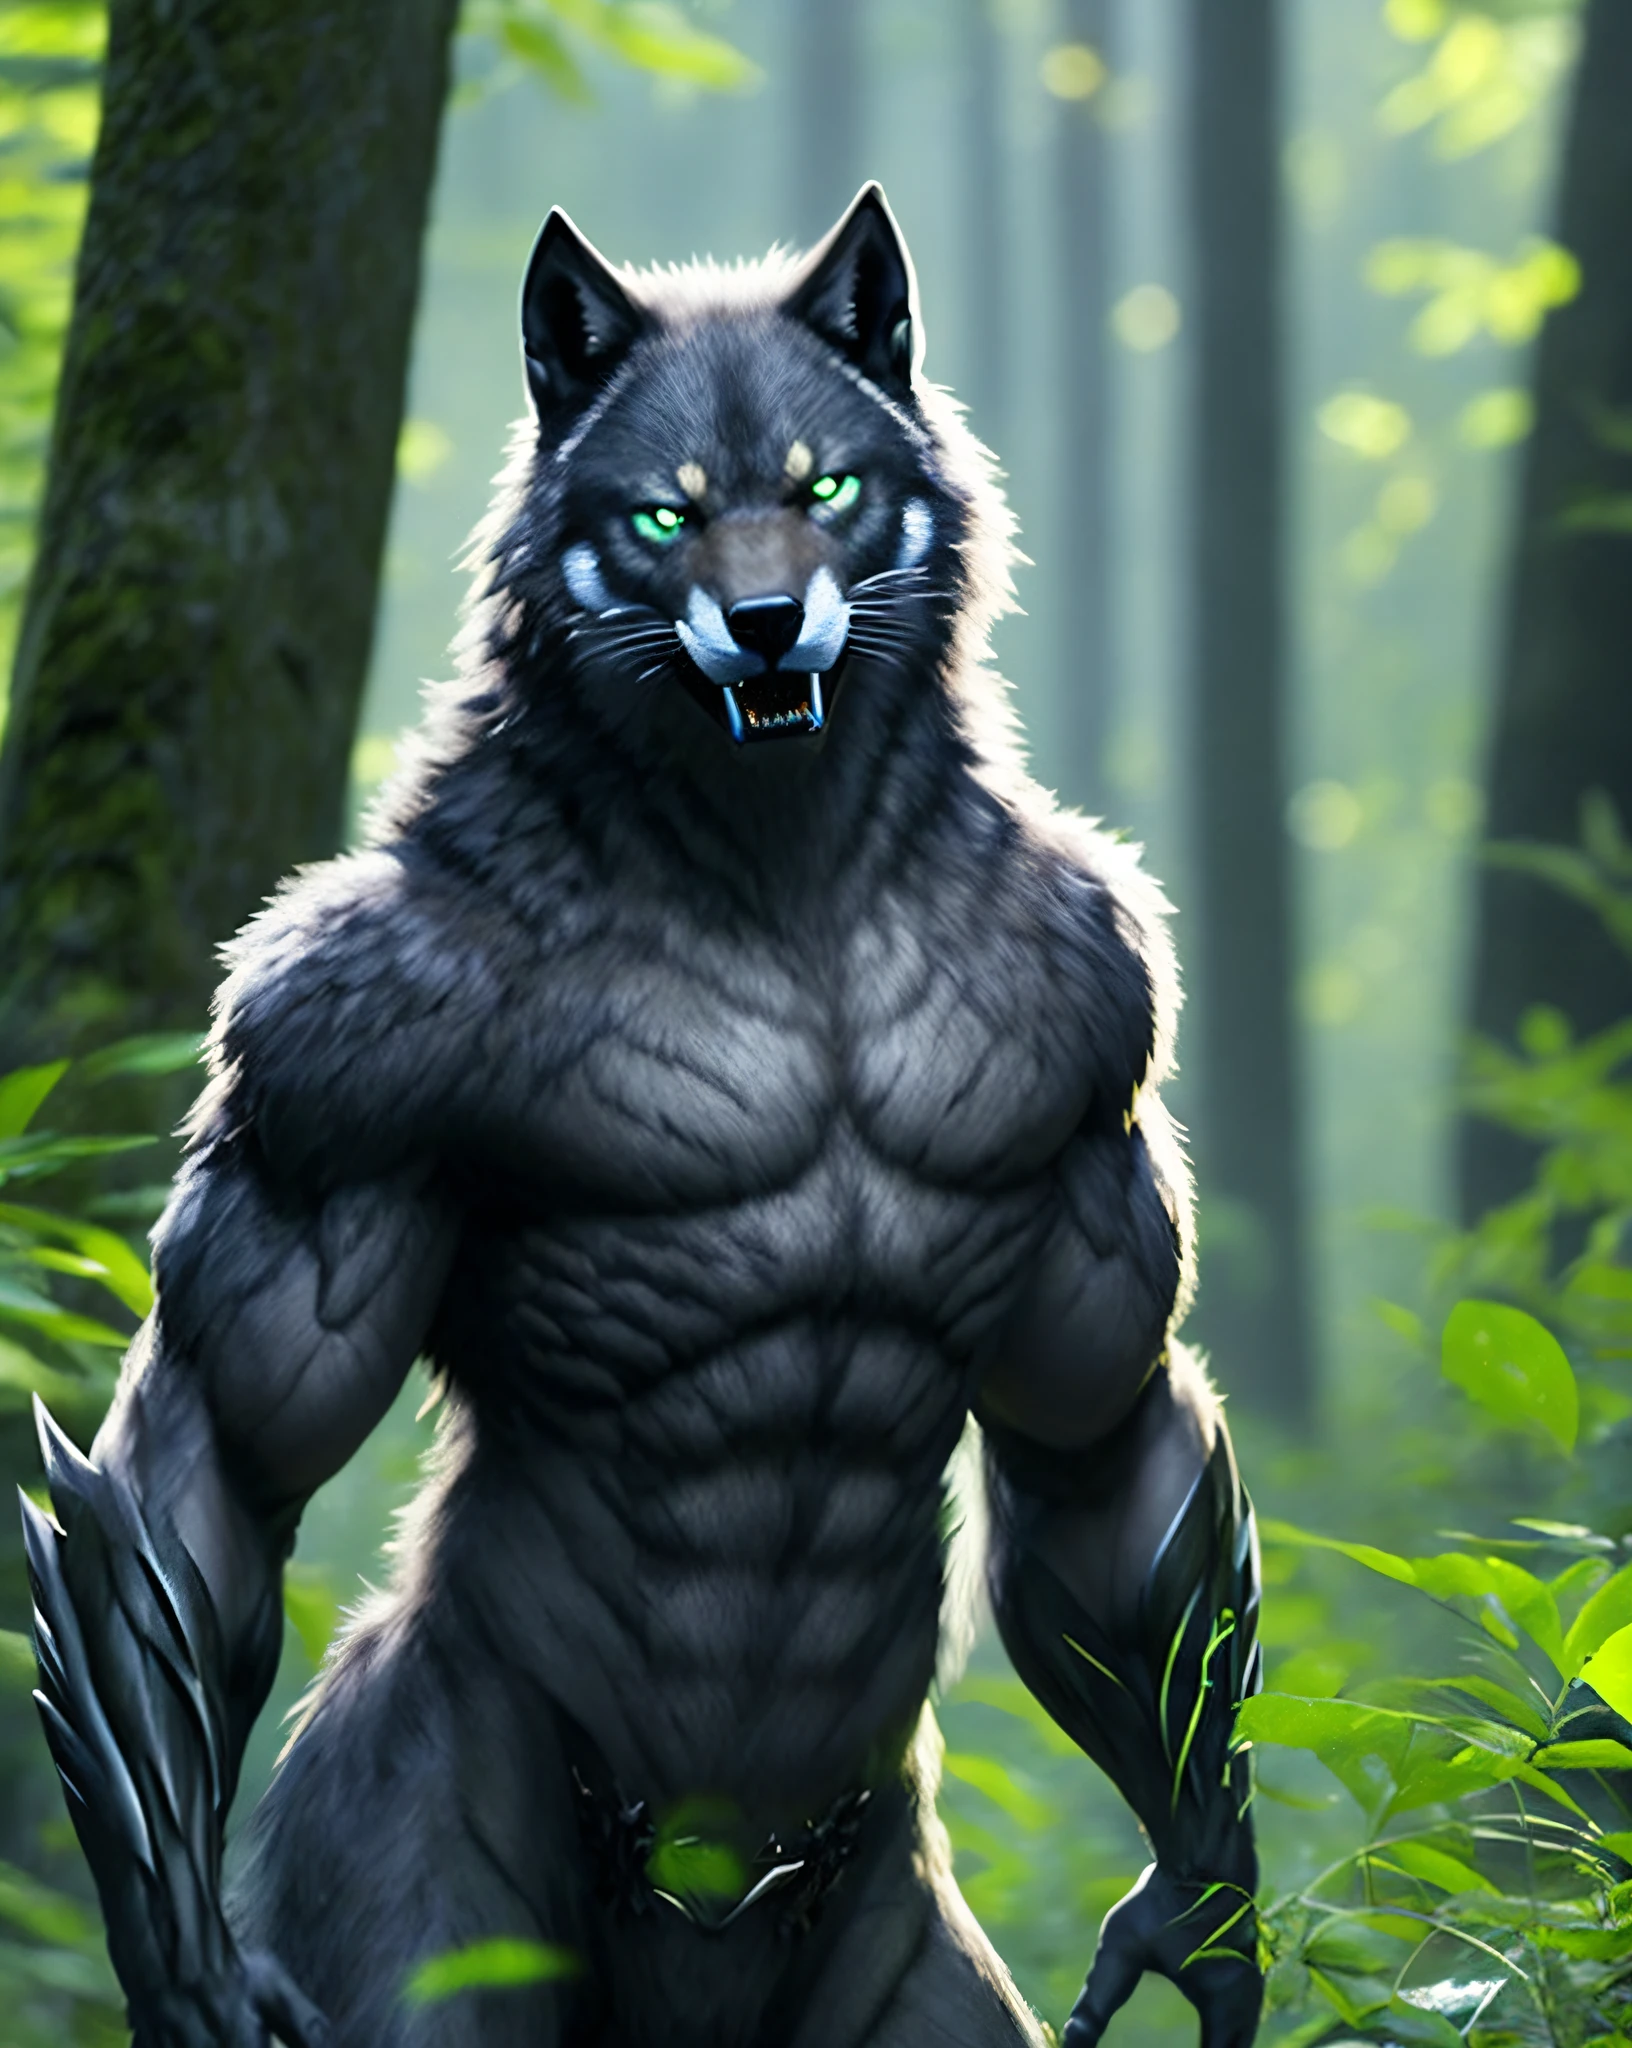 fking_scifi_v2, werewolf, werewolf, panther large-headed, (green eyes), in a forest, 80mm, f/1.8